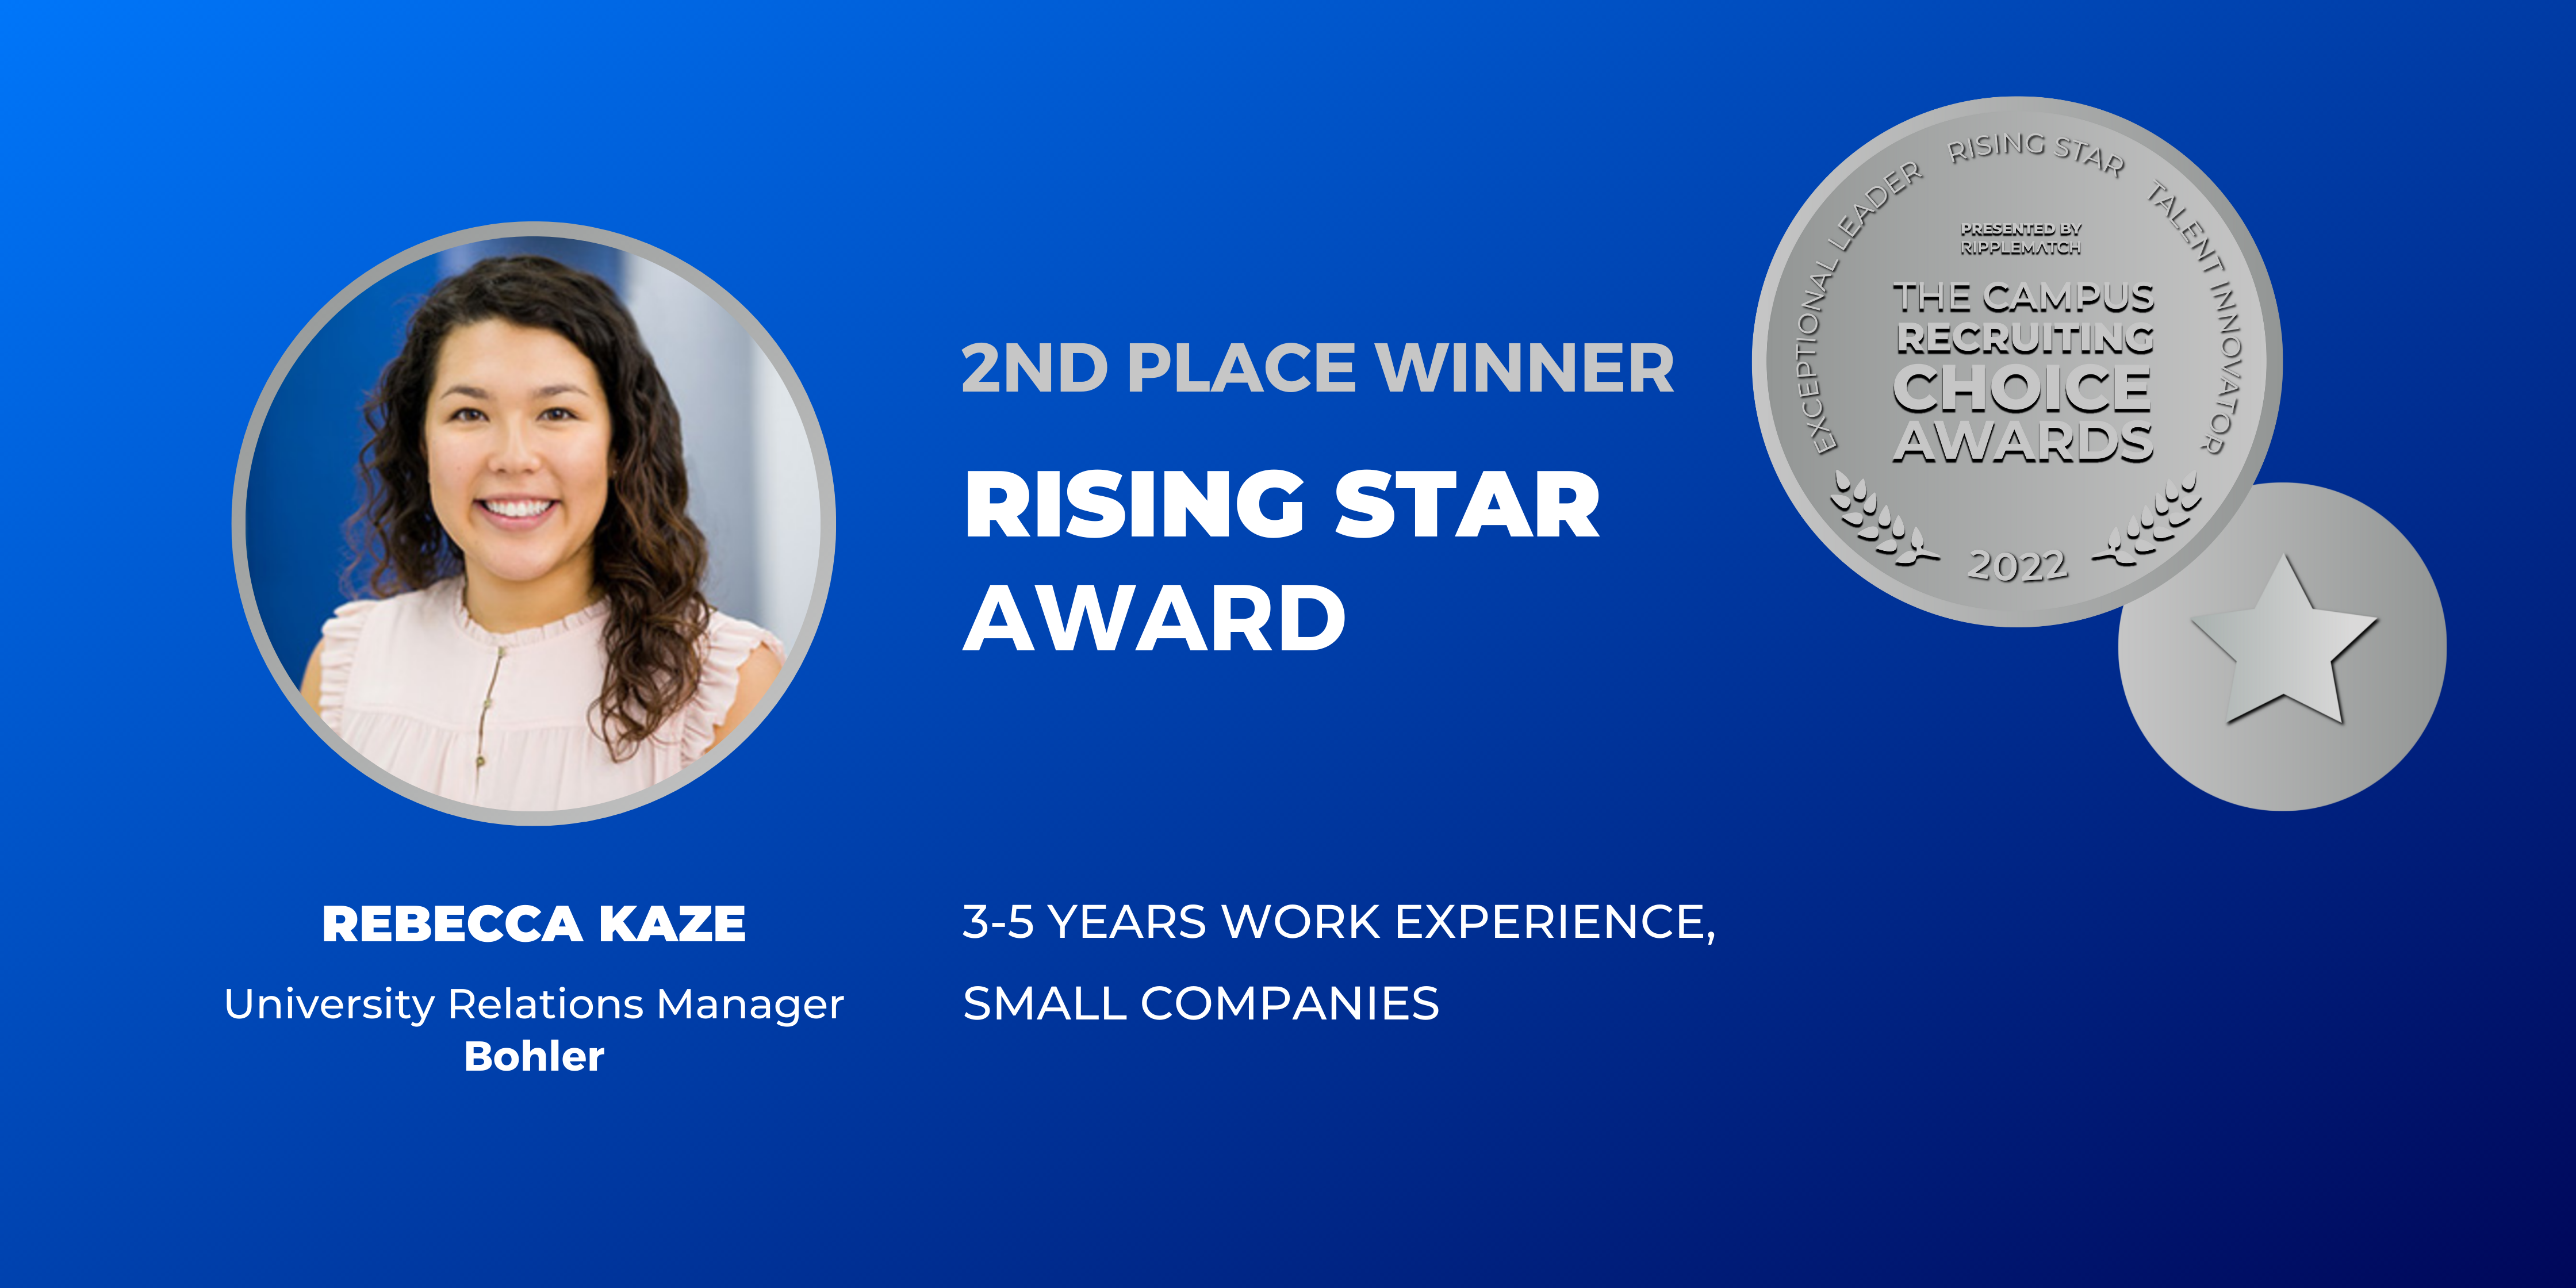 RISING STAR - 2nd place - 3-5 Years Work Experience, Small Companies - Rebecca Kaze